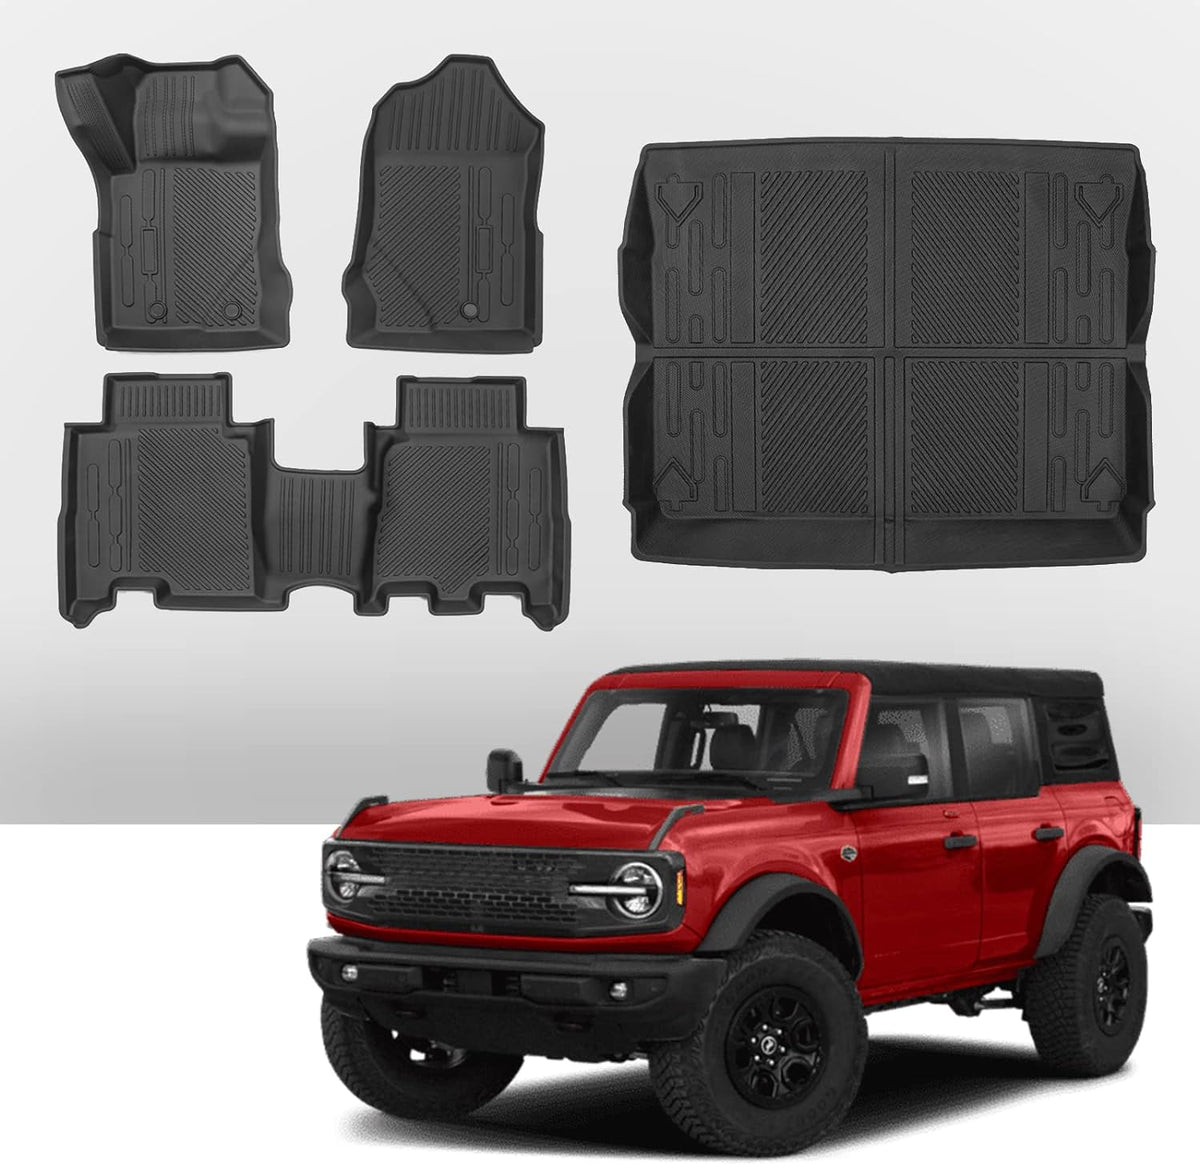 Mabett Floor Mats and Cargo Liner for Ford Bronco Accessories 2021 2022 2023 2024 4-Door Interior Covers Protector Black